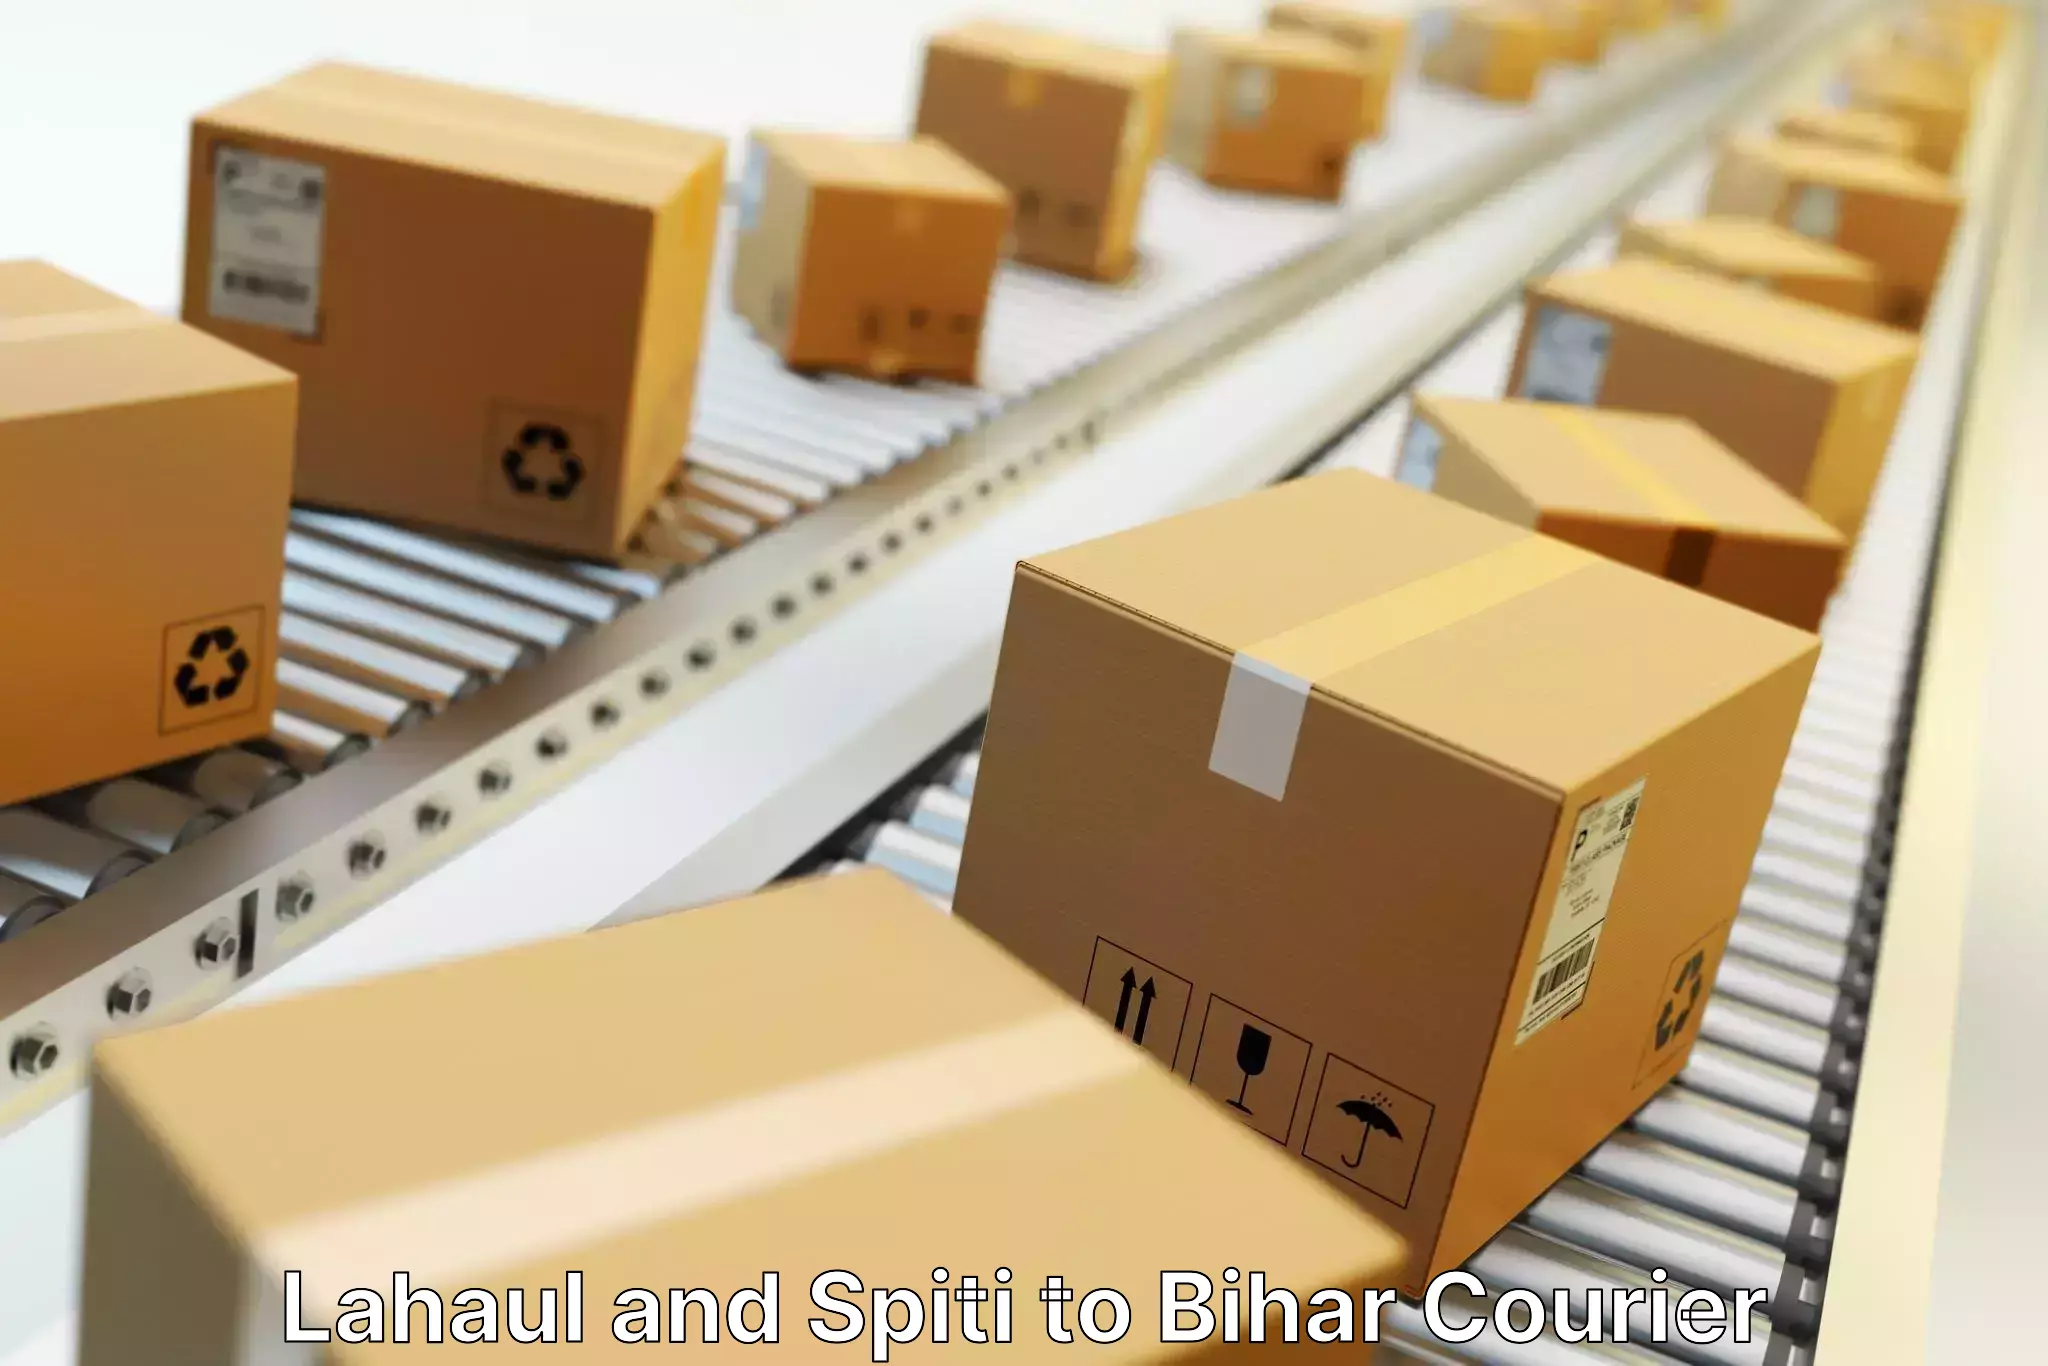 Global shipping networks Lahaul and Spiti to Barh